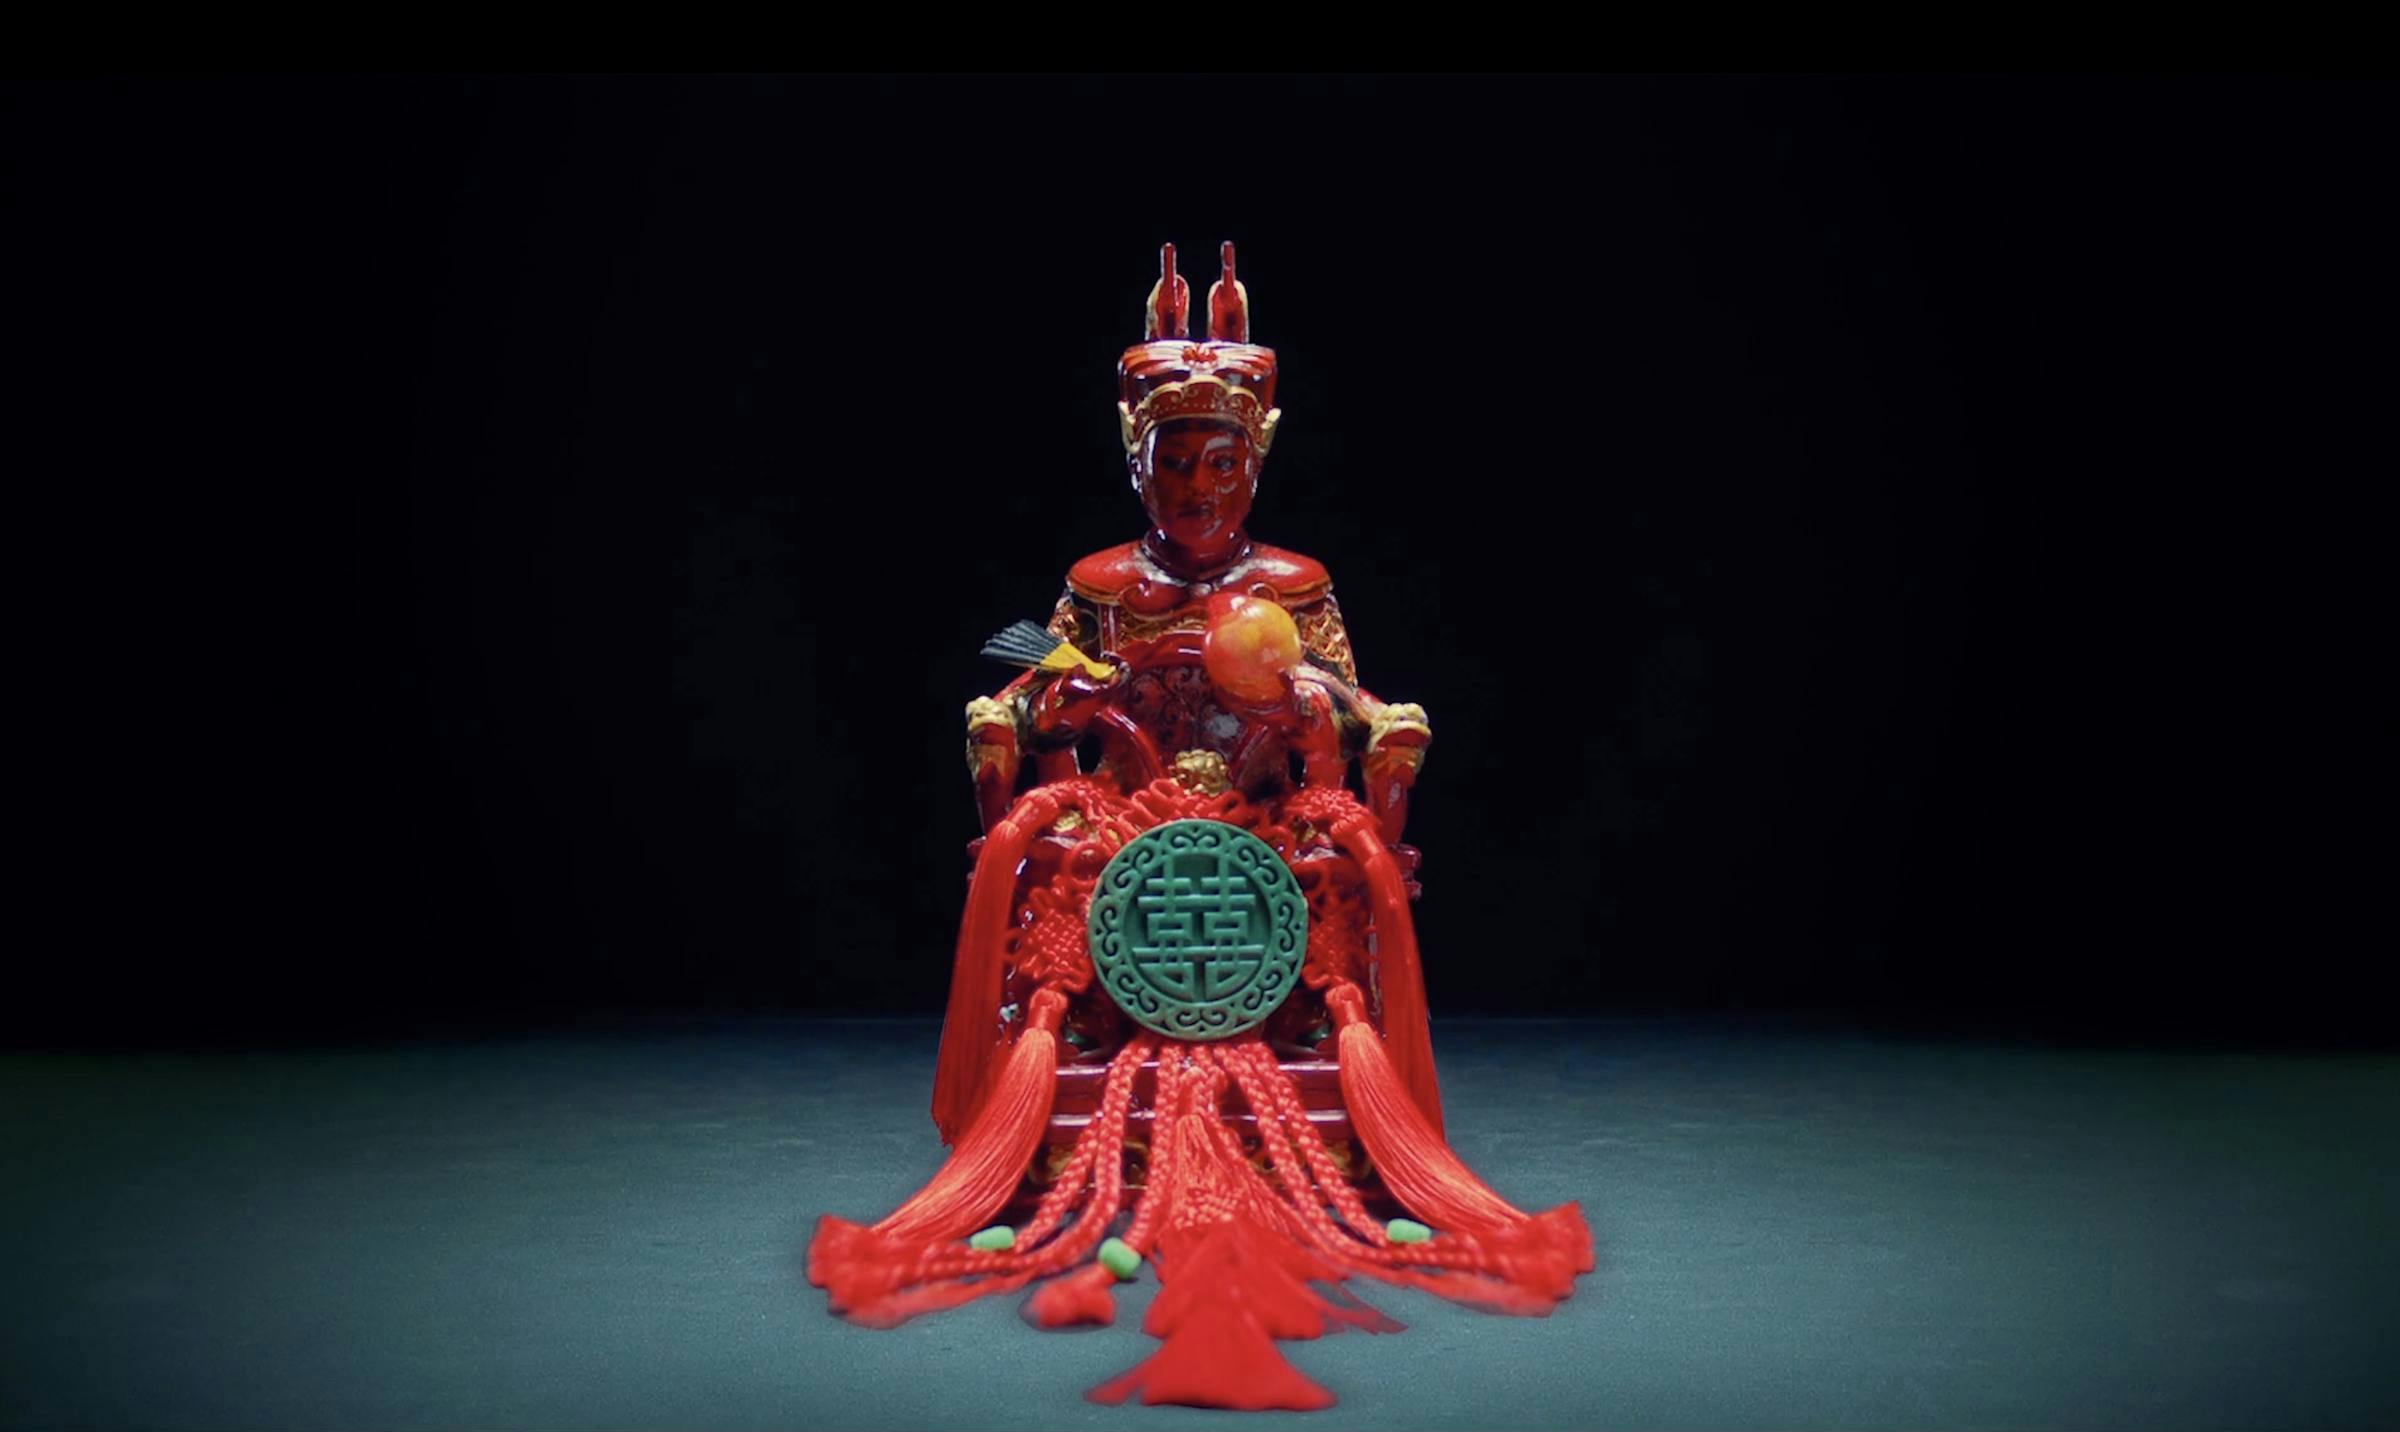 A Qing dynasty god in a darkened space. They are adorned with red tassels